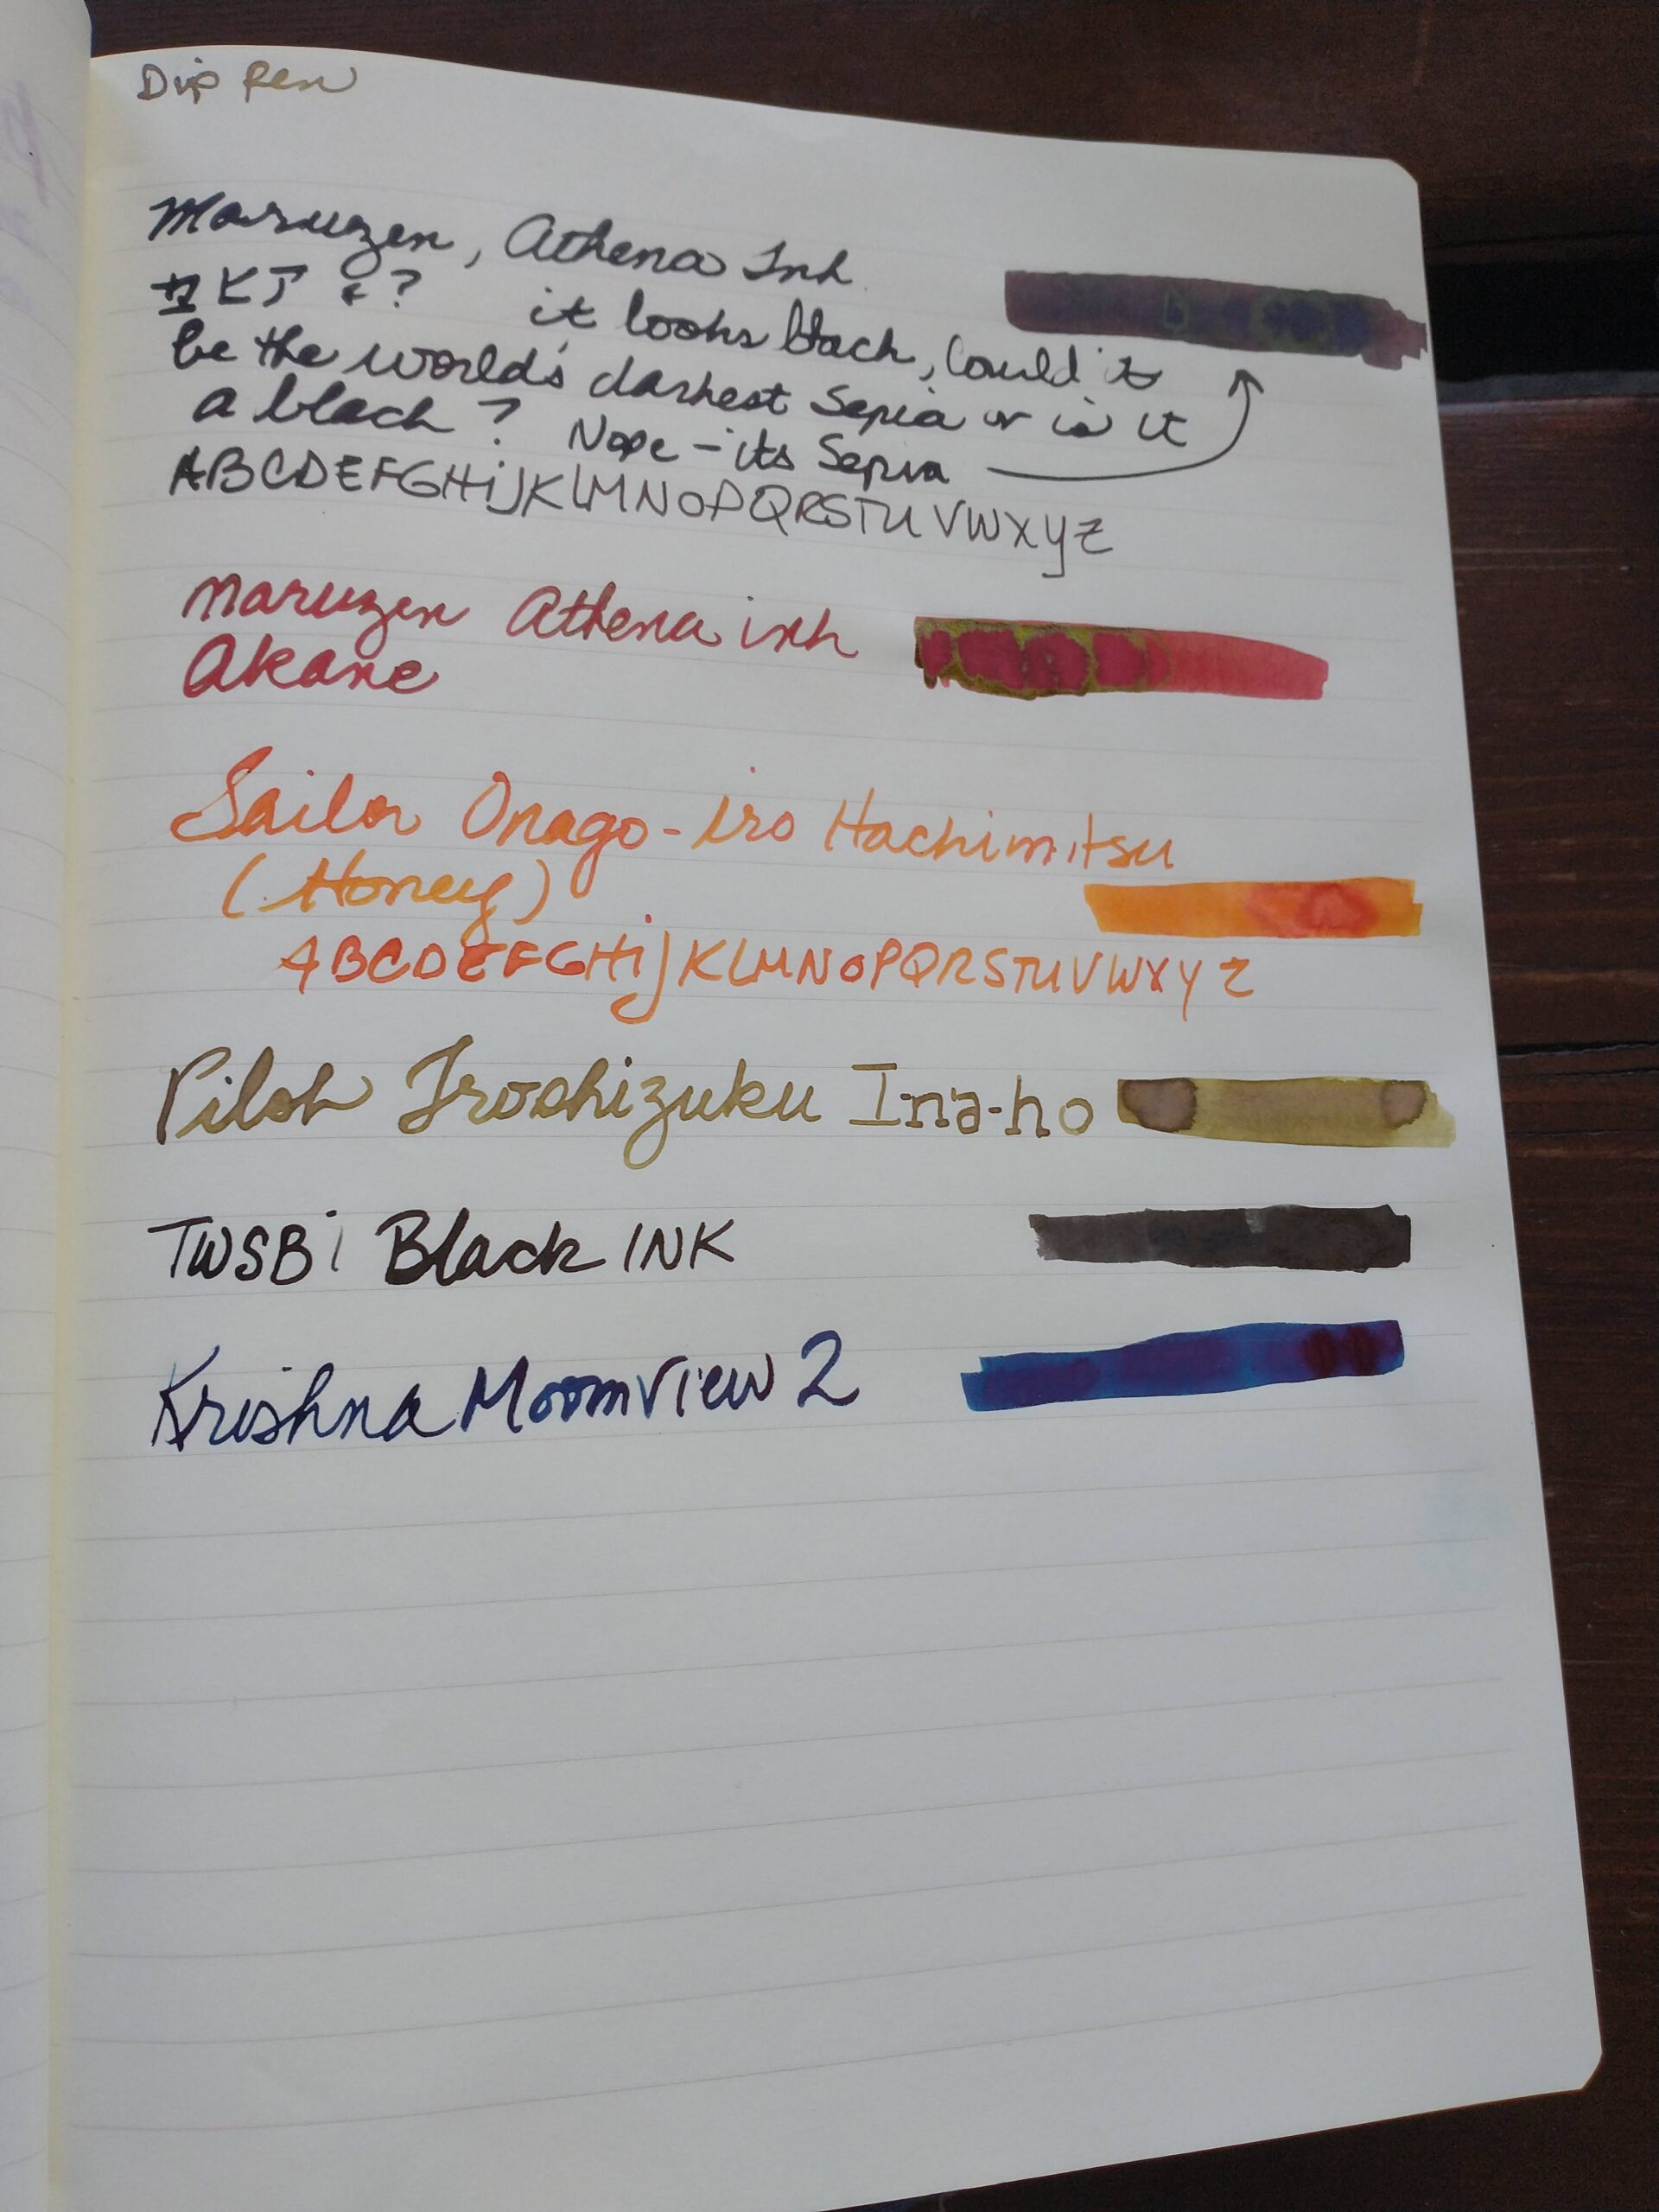 A page of ink tests showing names of inks, written in the ink being tested